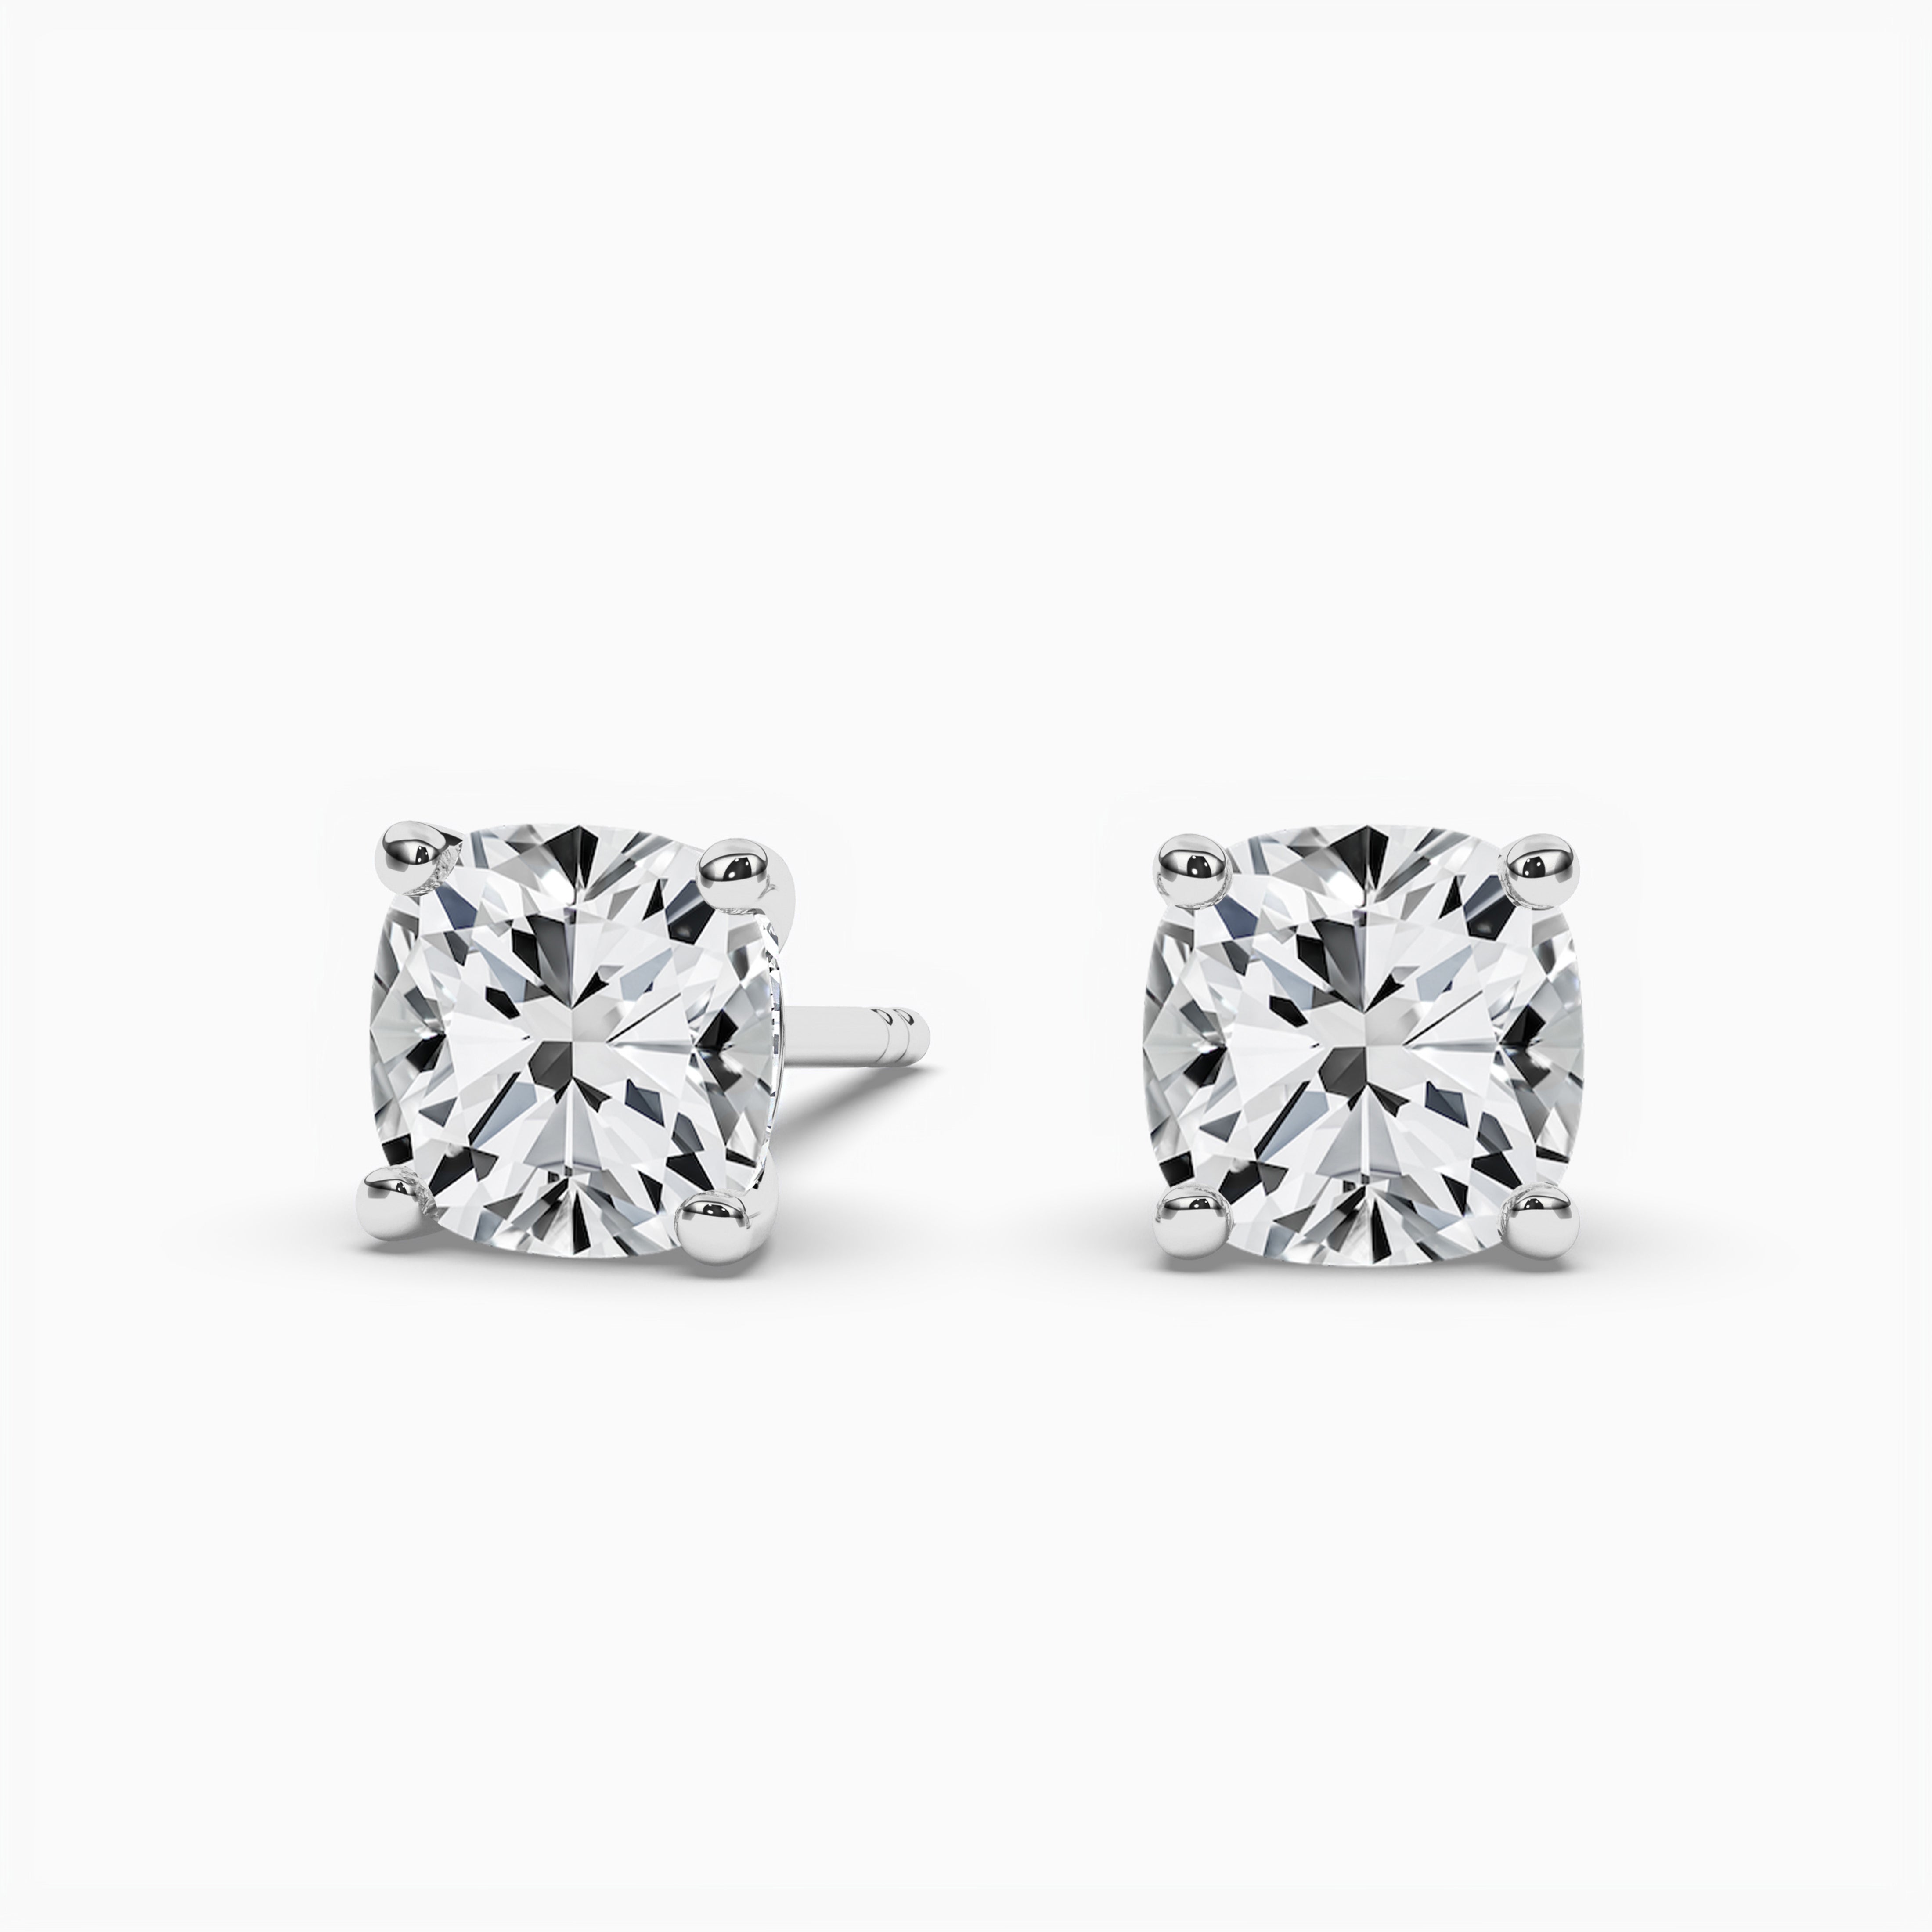 2.00 ct white gold and diamond earrings